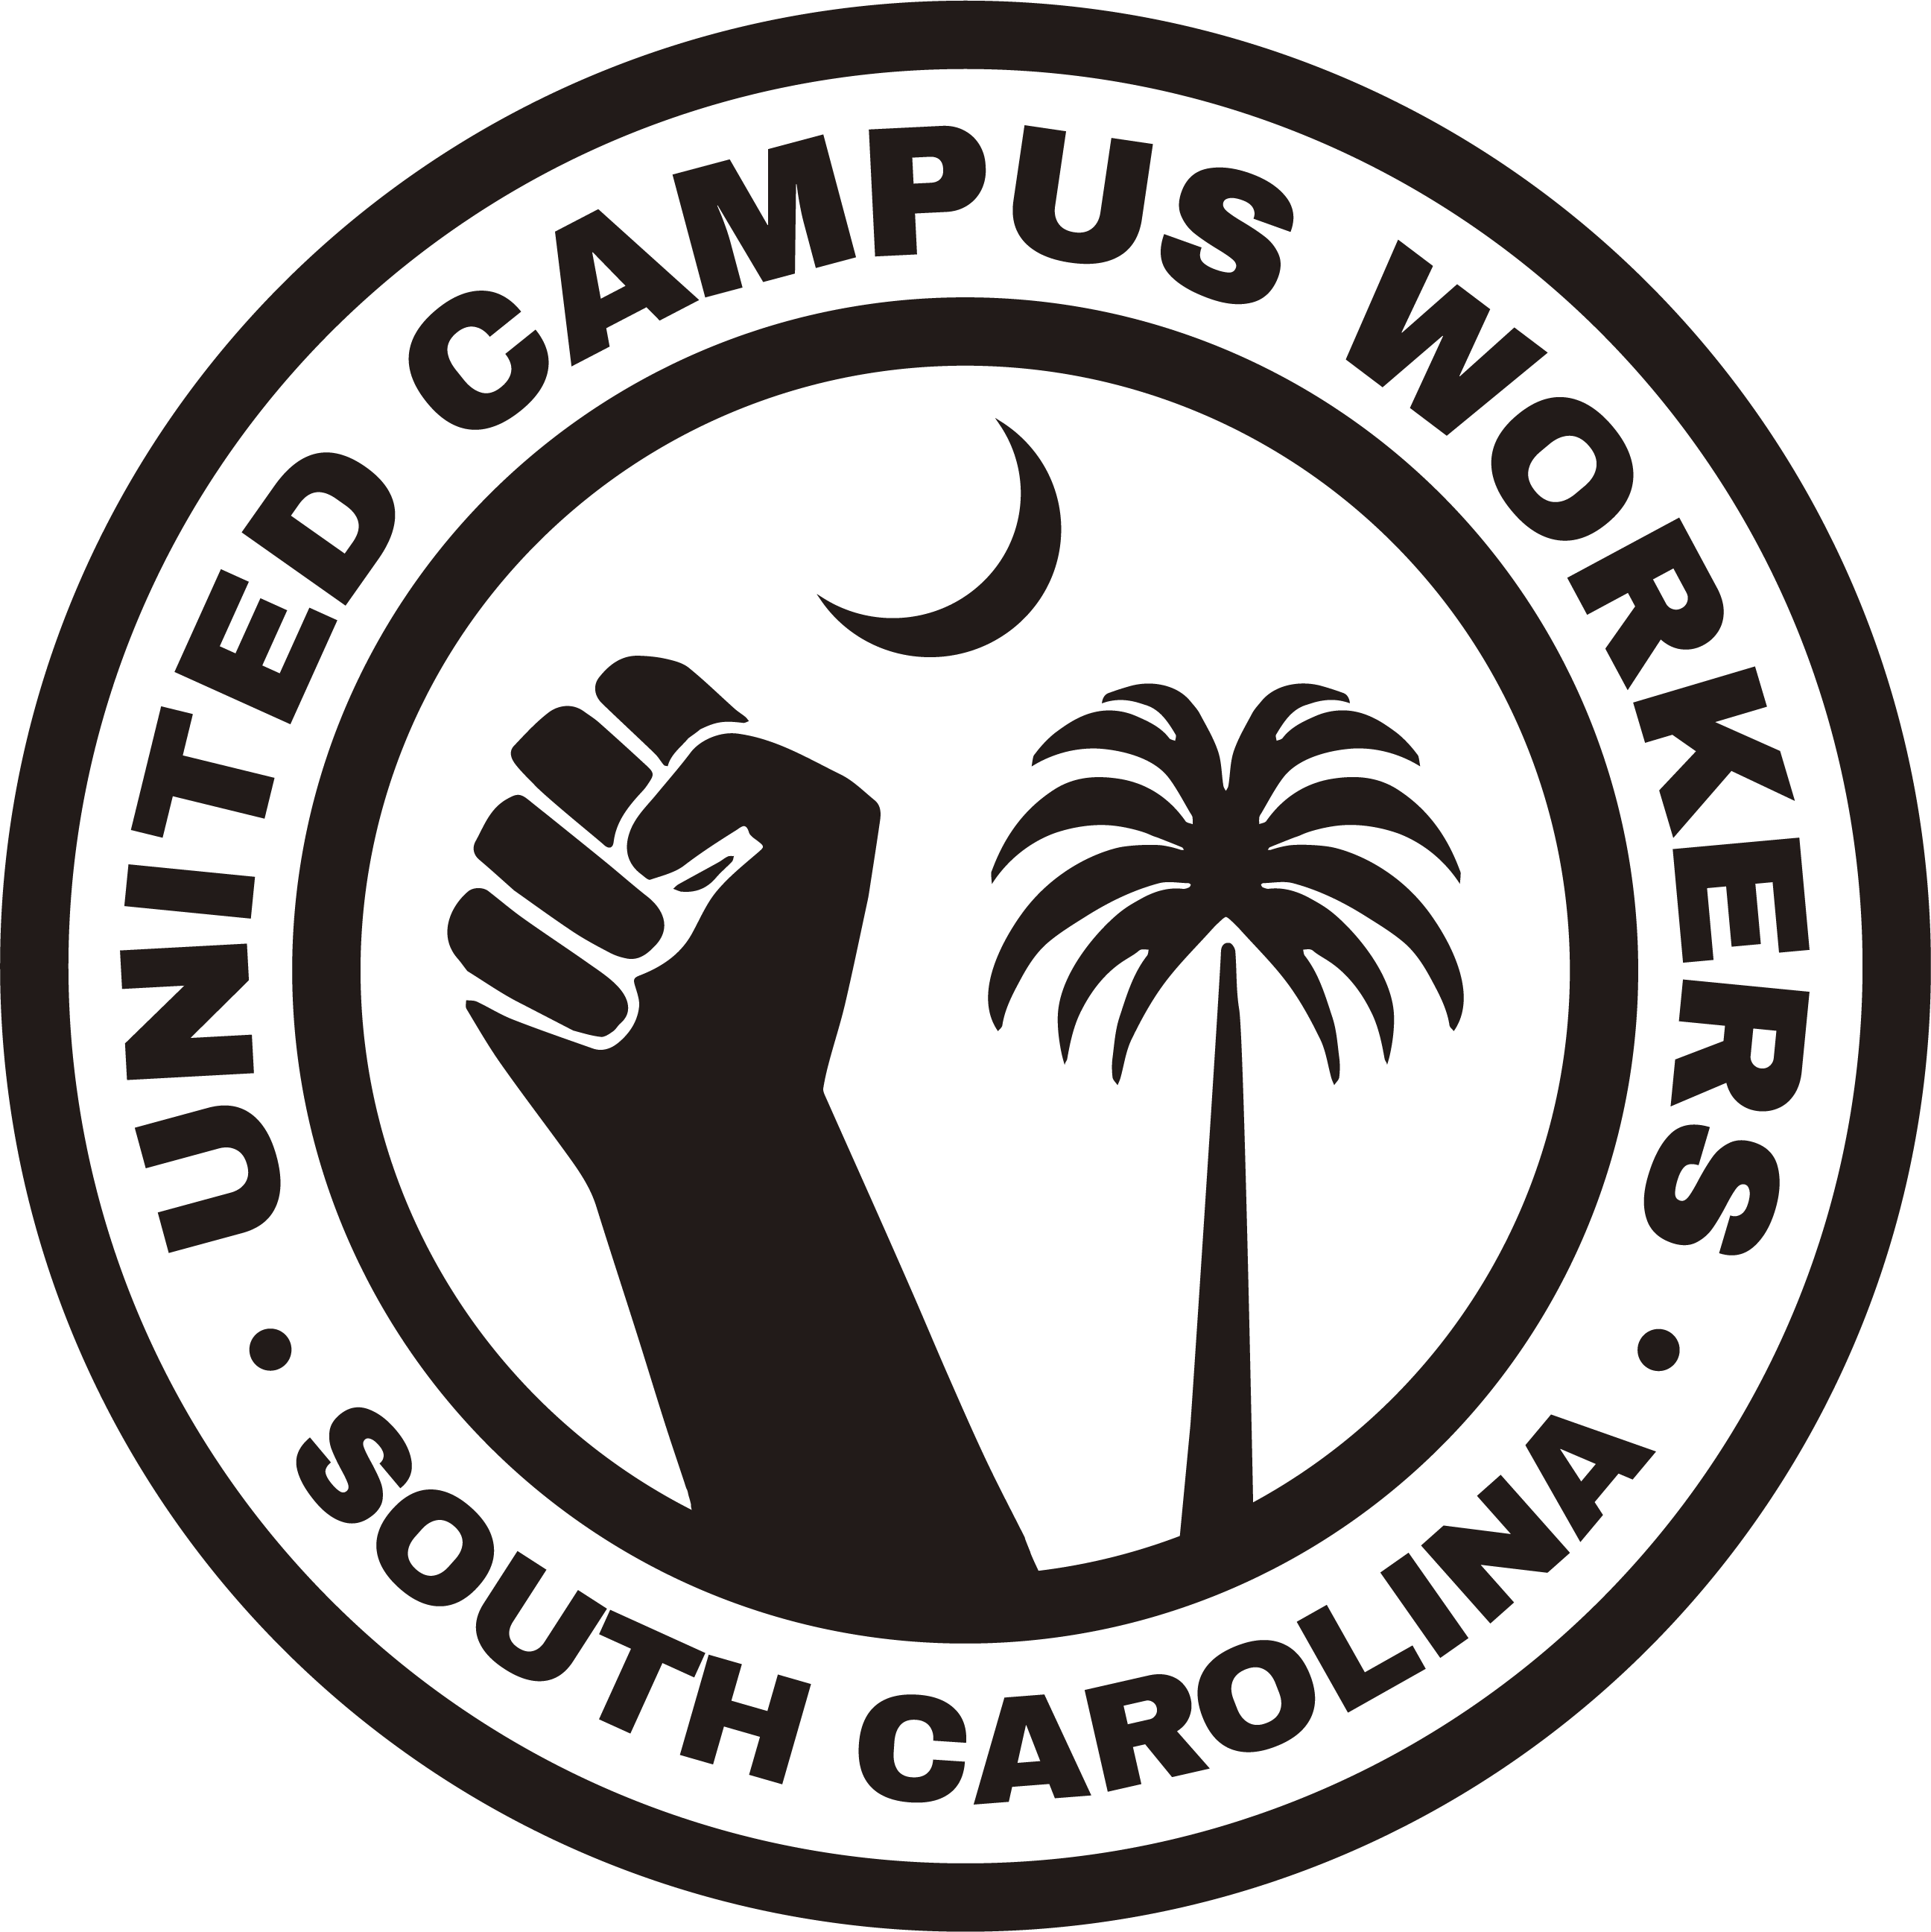 United Campus Workers of South Carolina